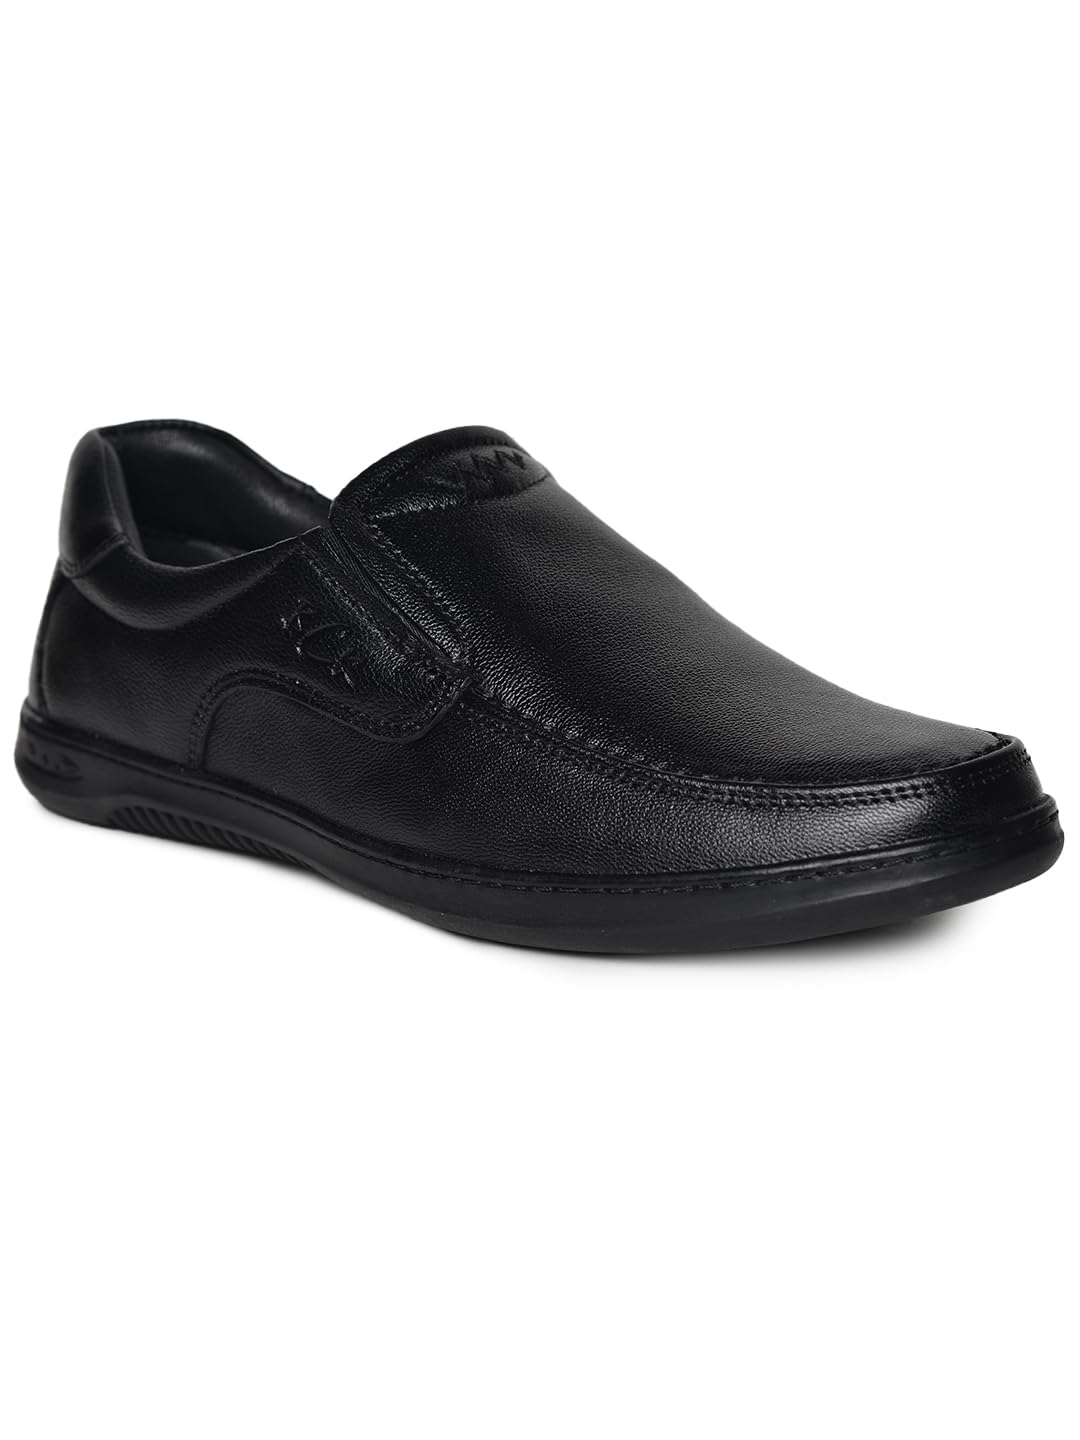 Errol Genuine Leather Casual Shoes for Mens (Black, 41) 